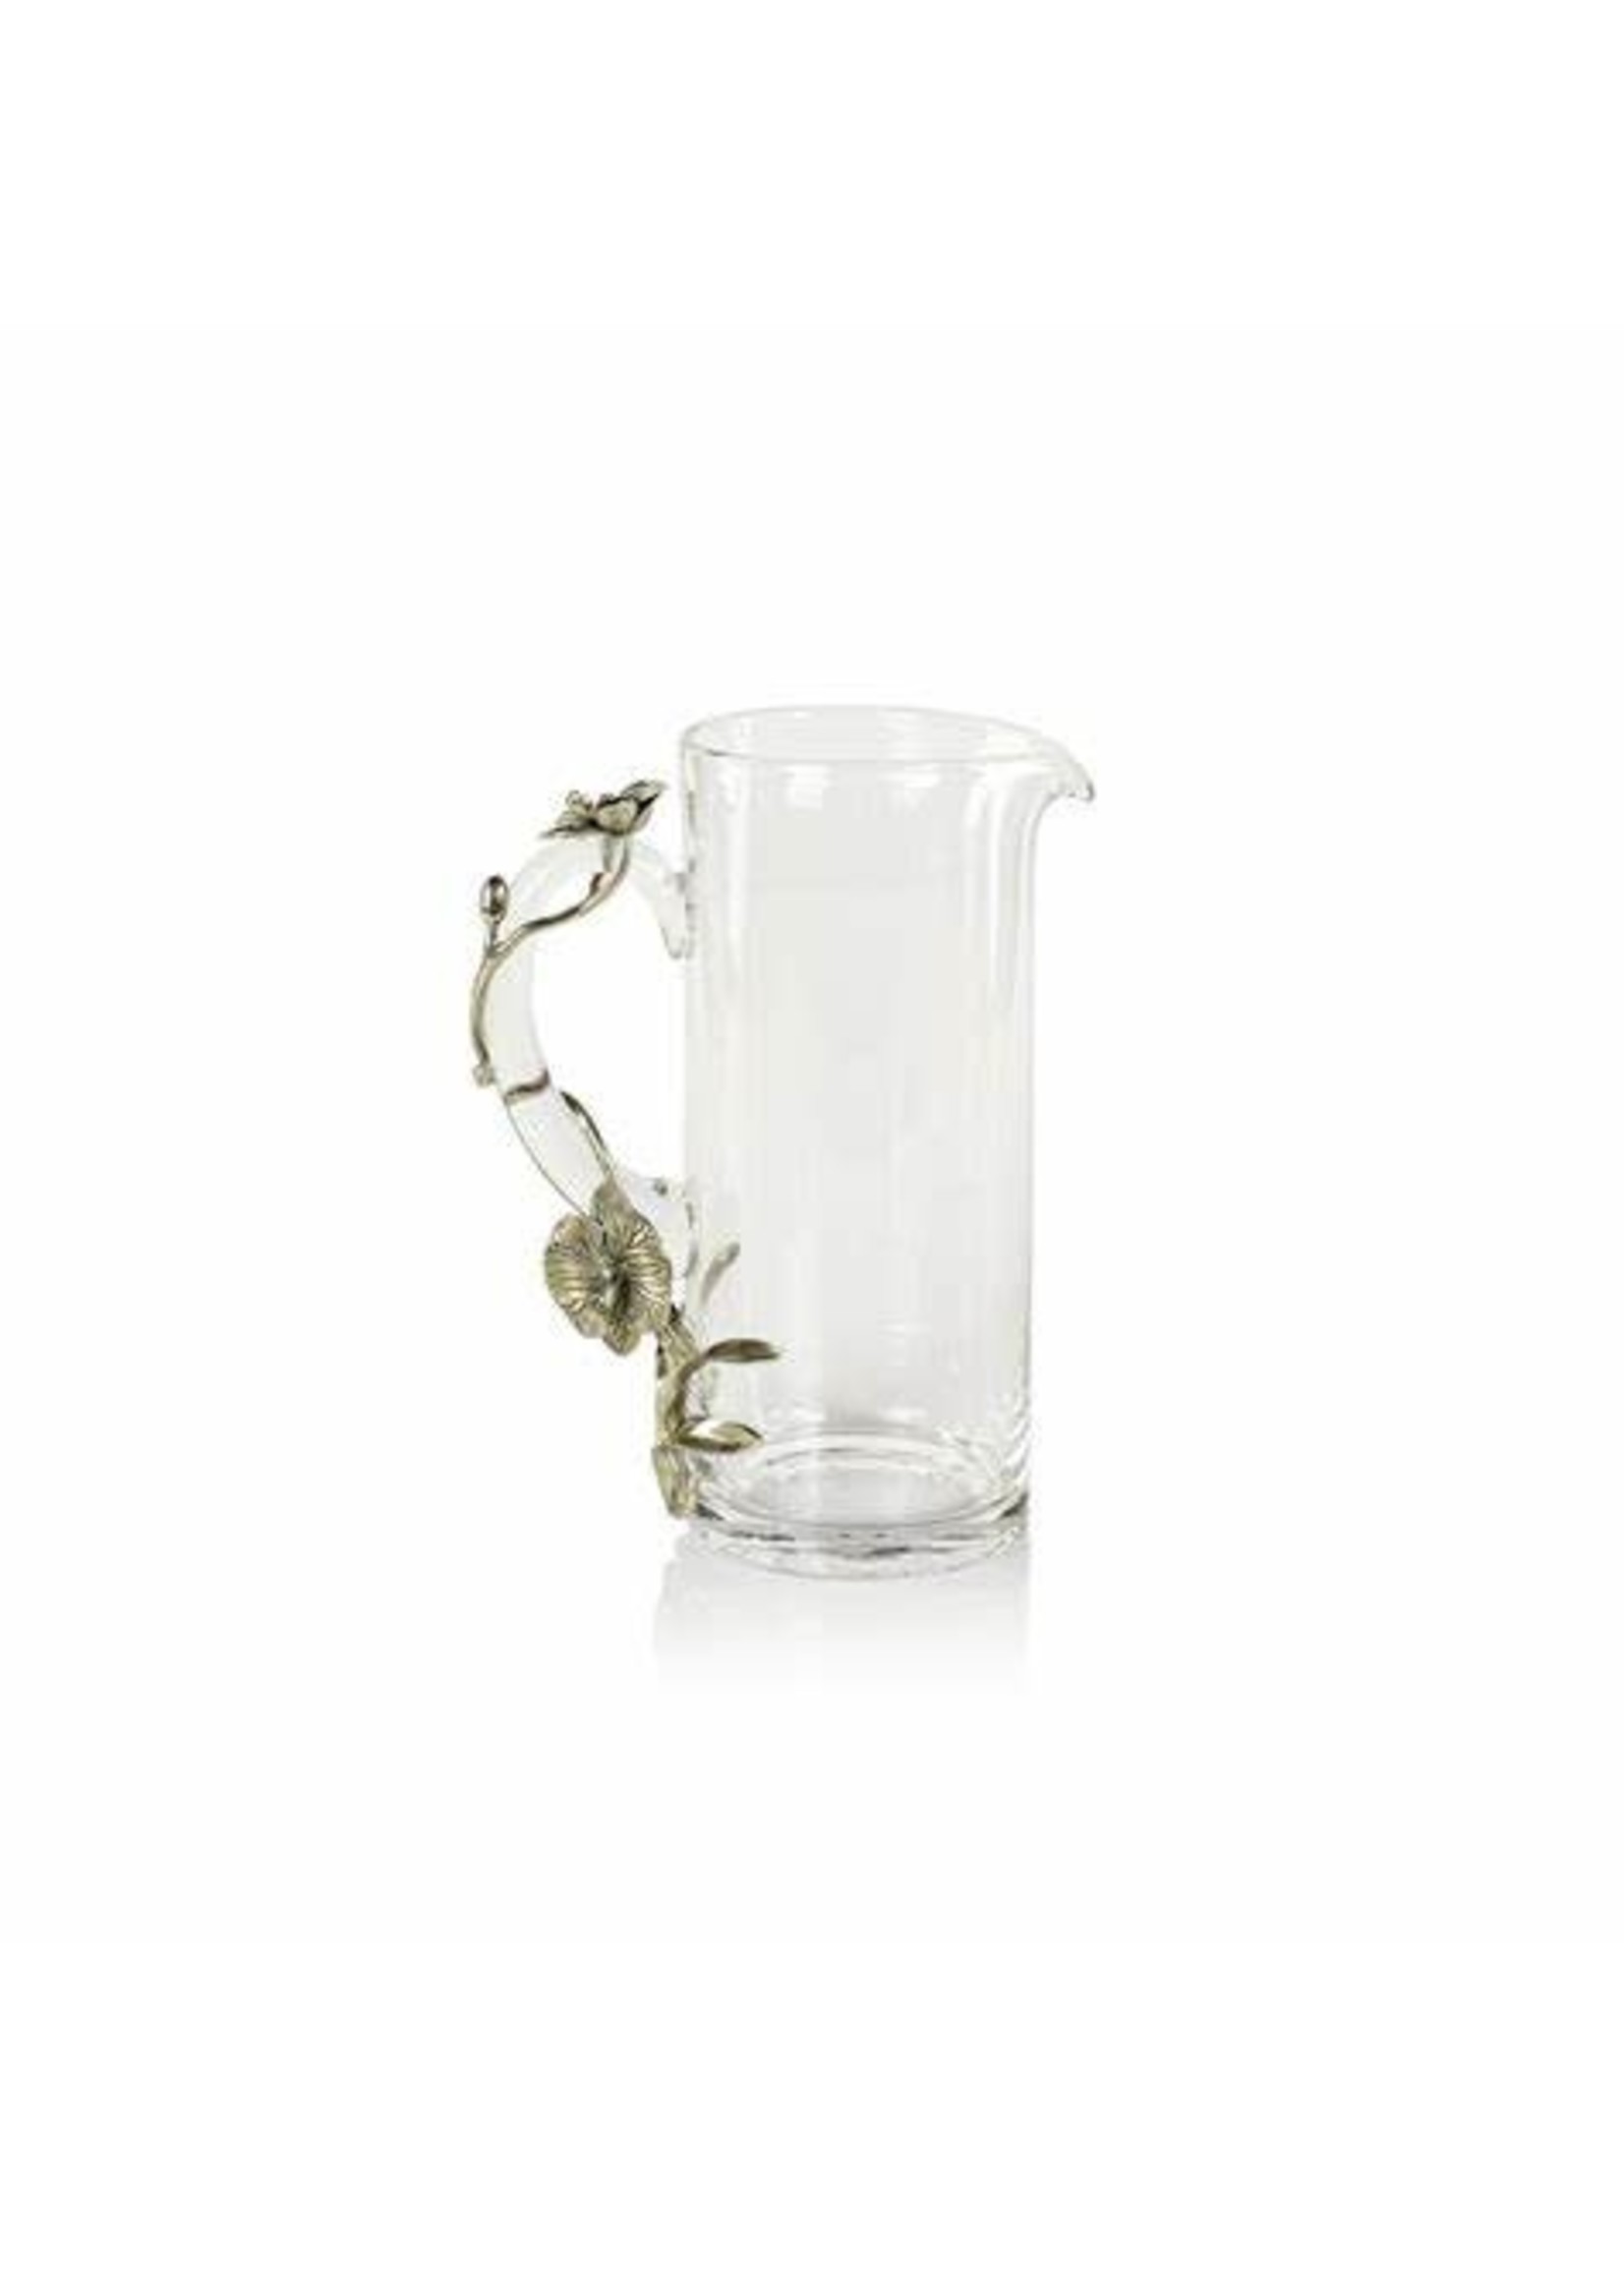 Zodax Zodax Durban Orchid Pewter and Glass Pitcher